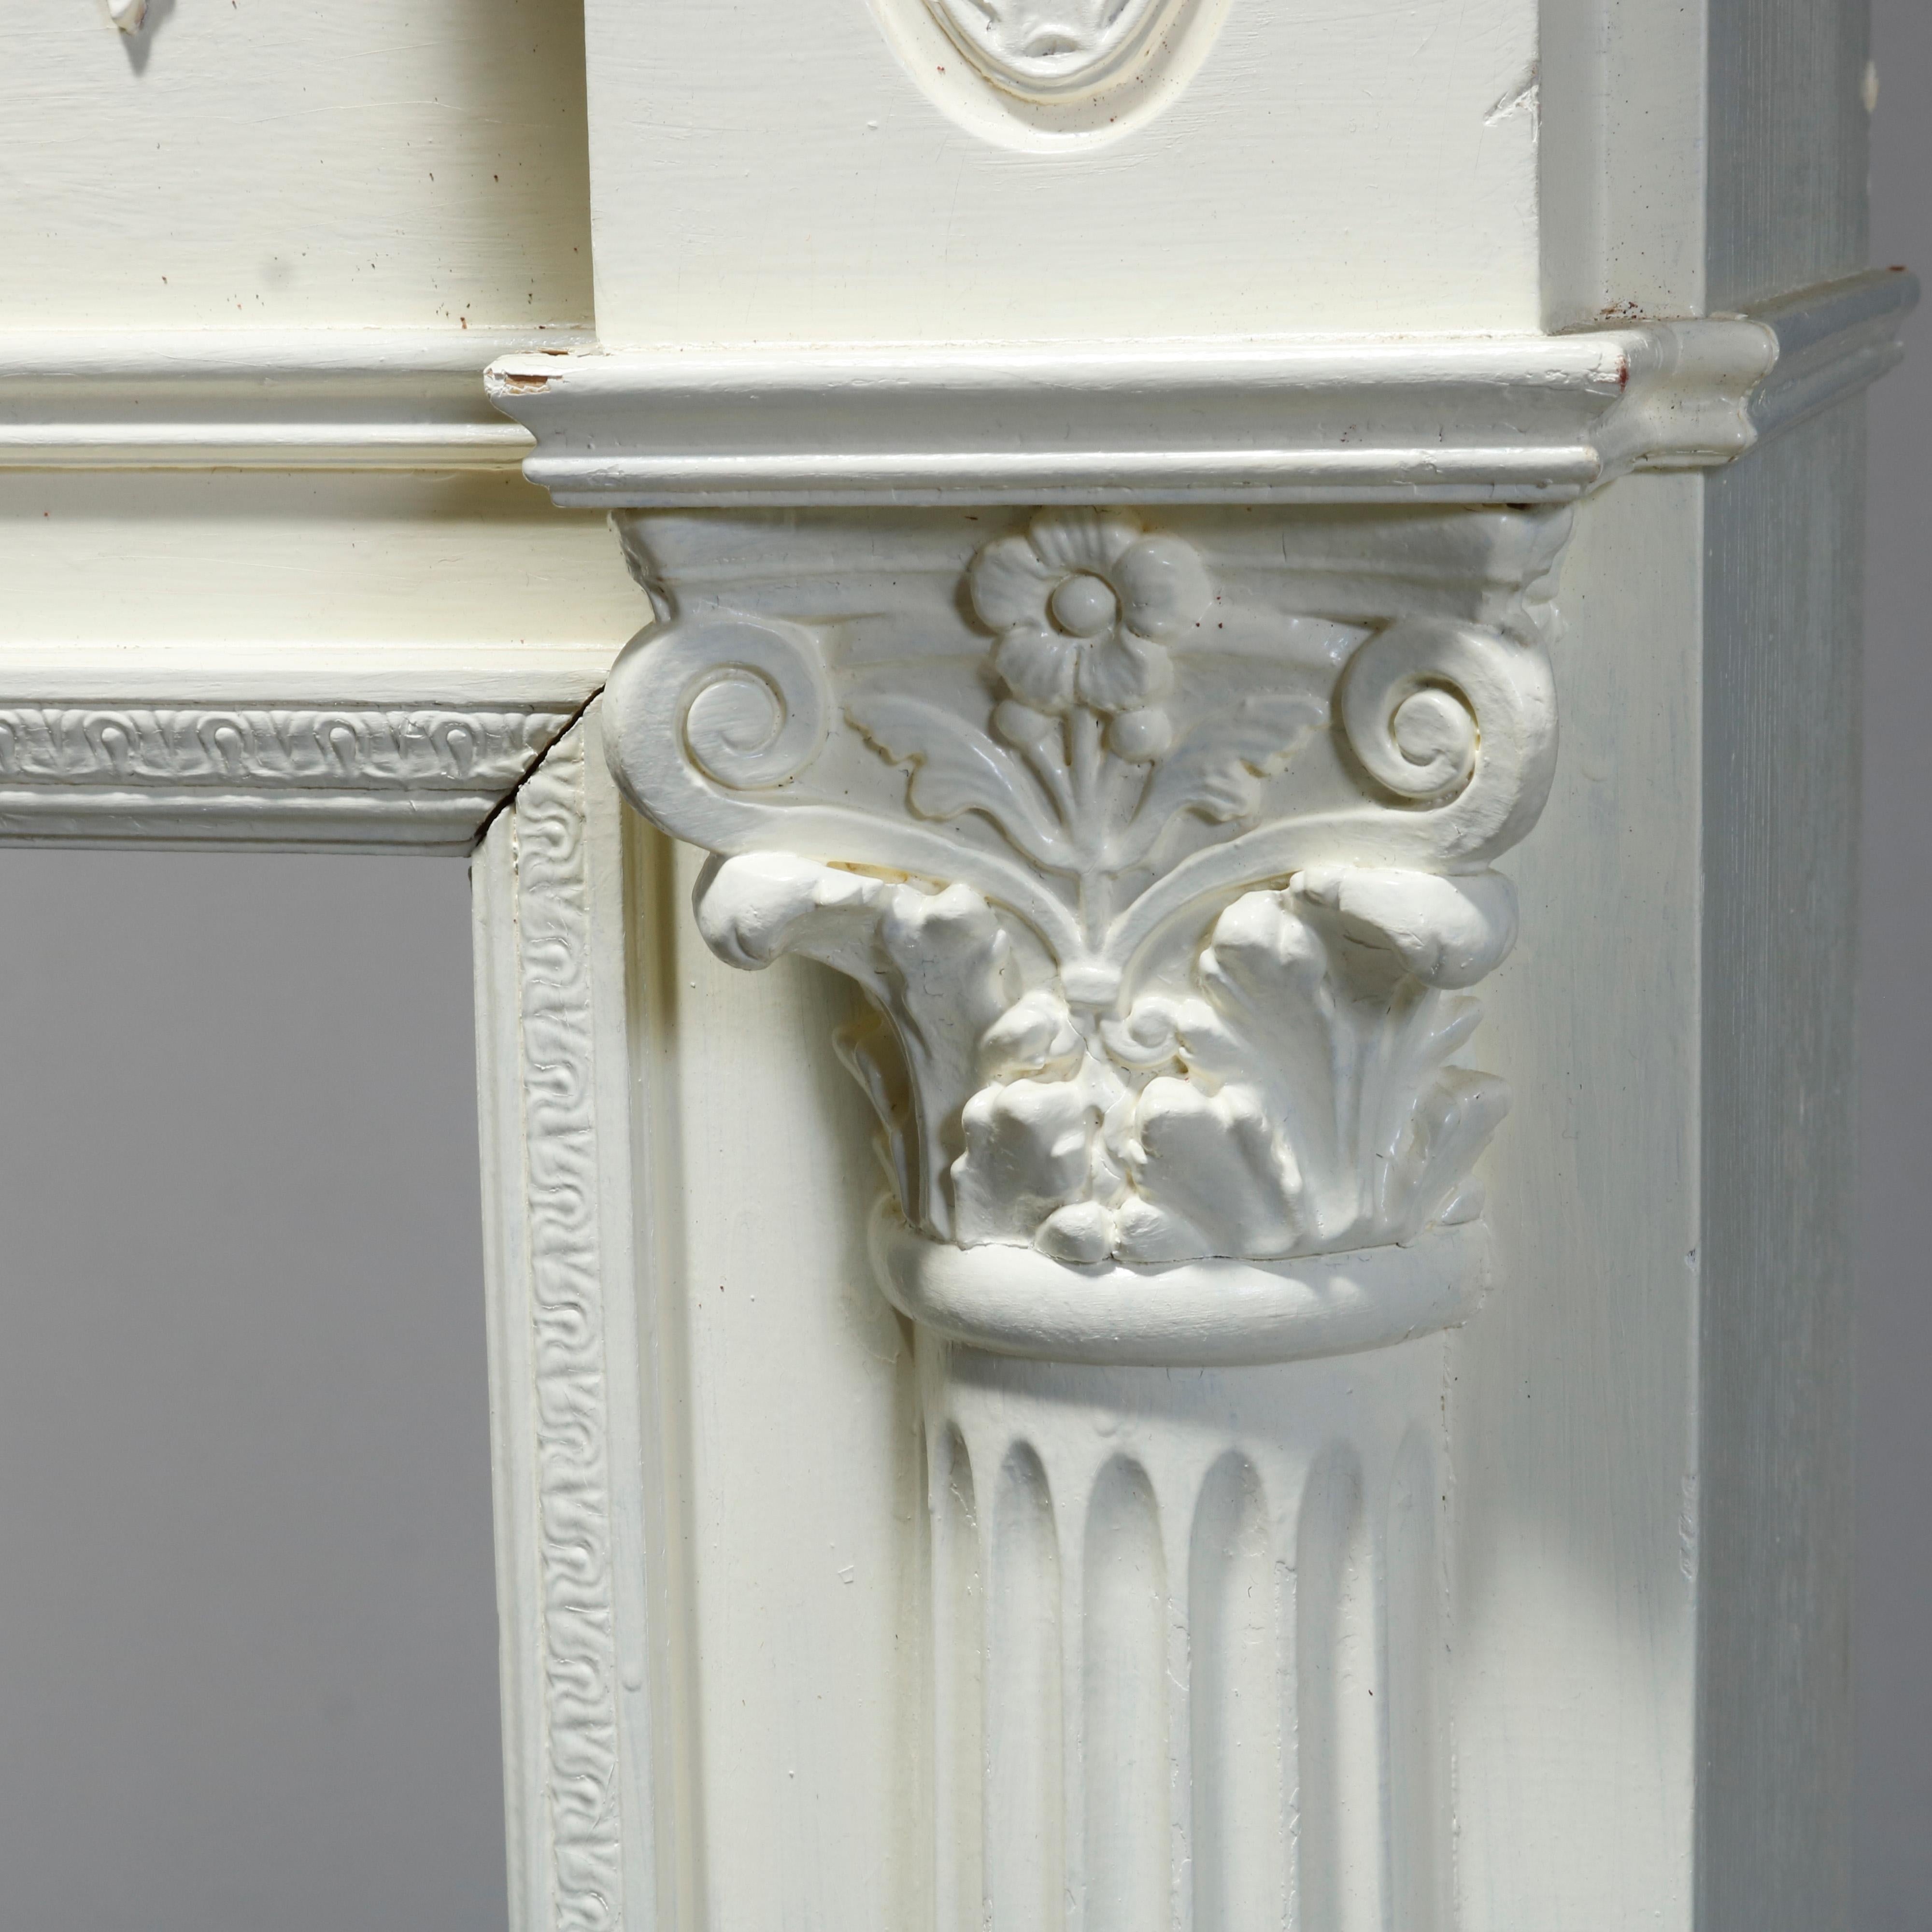 An antique neoclassical architectural fireplace mantle offers wood construction with frieze having applied repeating wreath and swag garland elements with central urn and flanking rosettes over Corinthian column supports, painted white, 20th